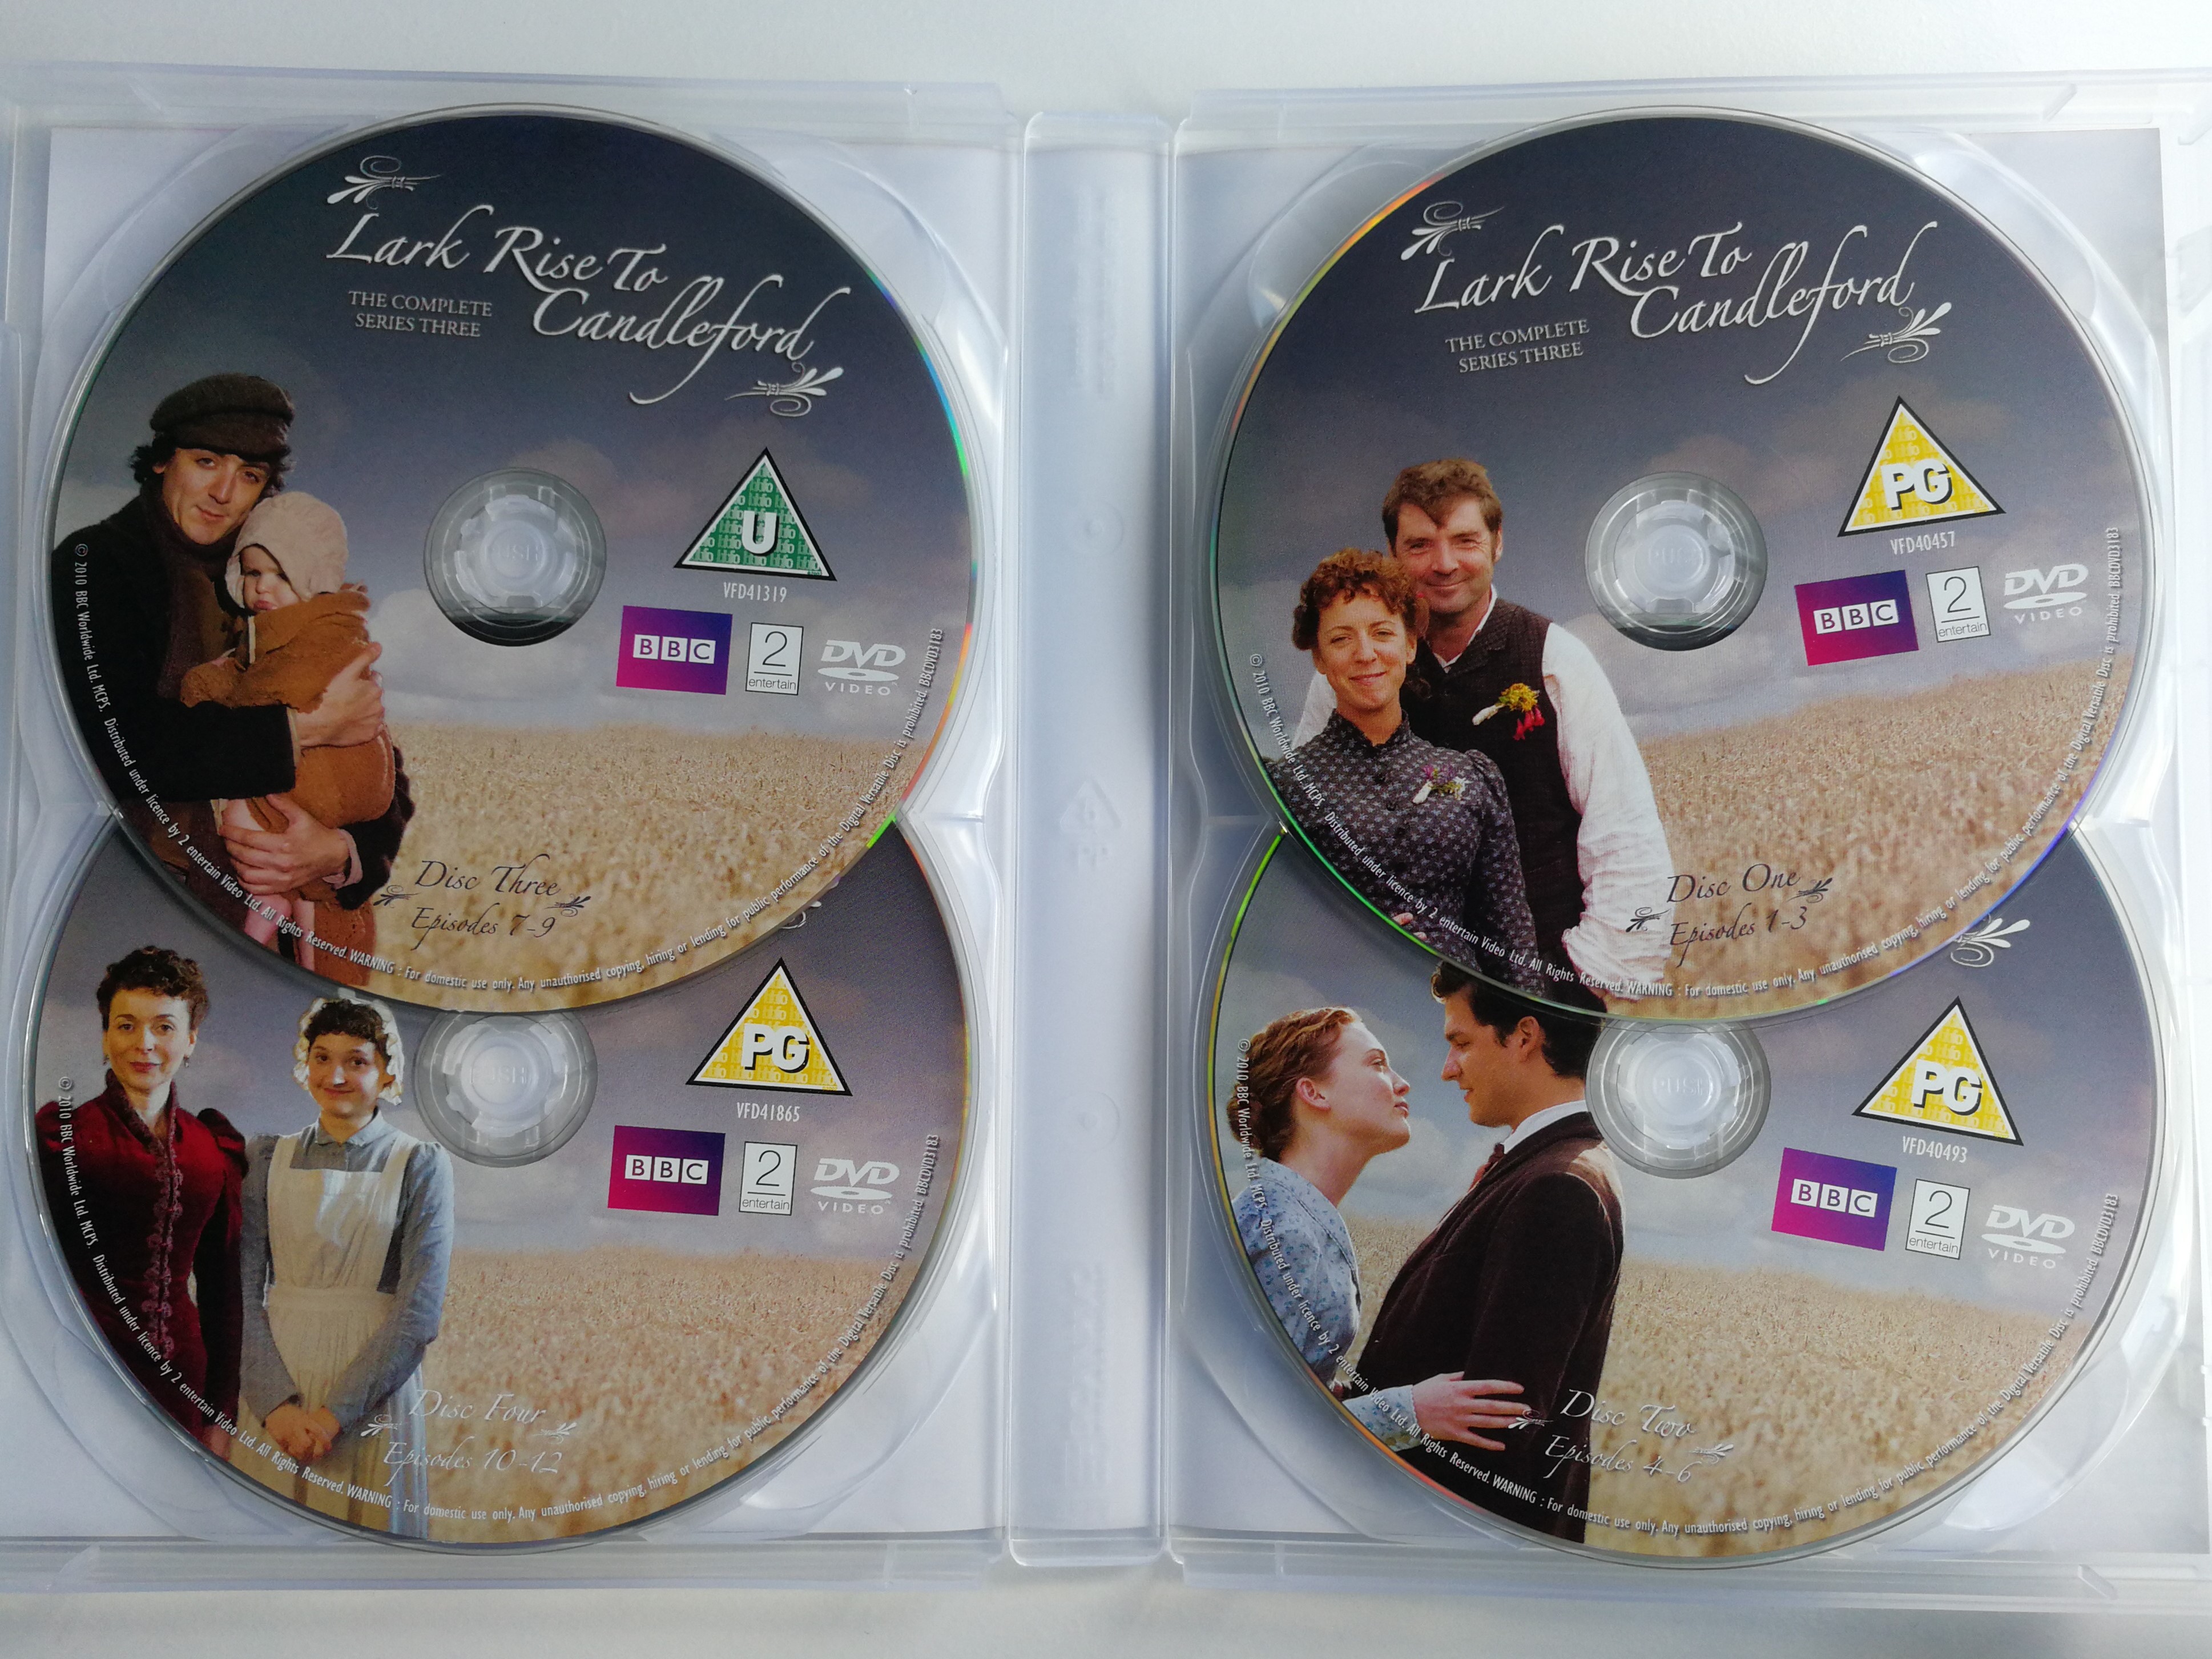 Lark Rise To Candleford DVD The Complete Series Three / 4 Disc Set BBC /  Directed by Sue Tully, Patrick Lau, David Tucker, Moira Armstrong, Paul  Seed, David Innes Edwards / From